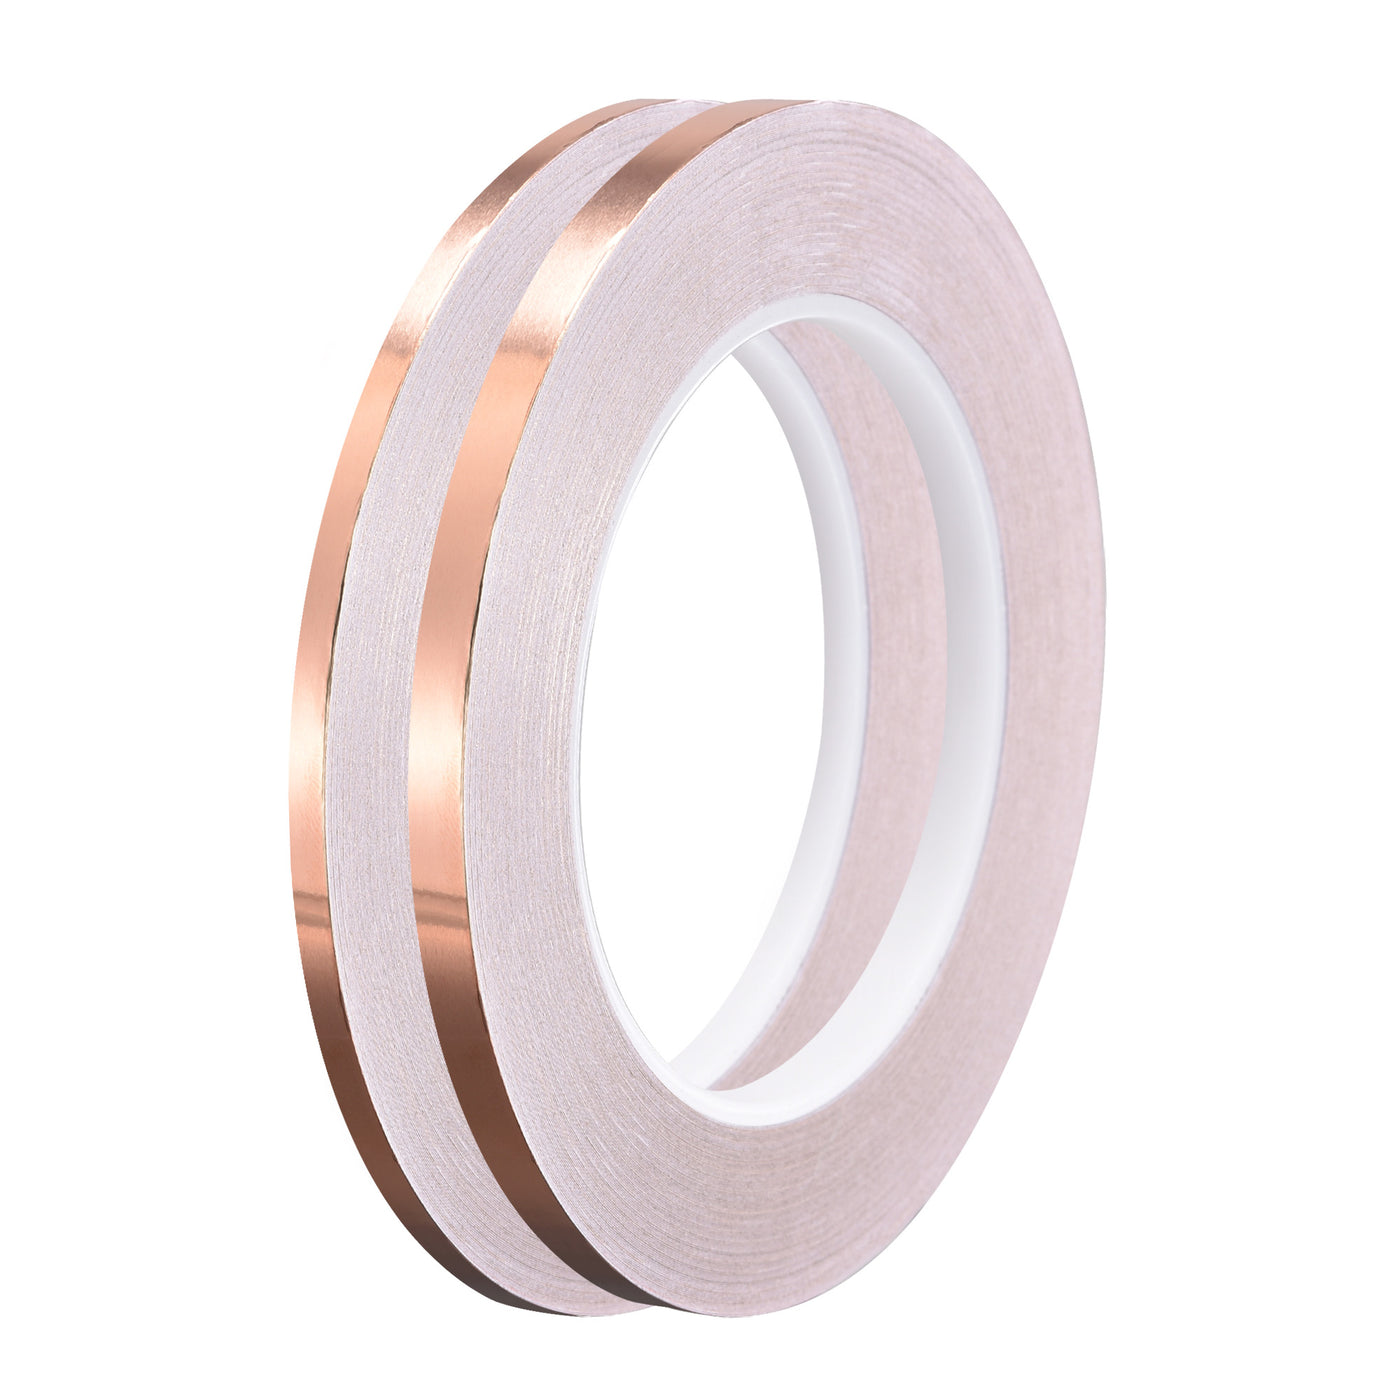 uxcell Uxcell Single-Sided Conductive Tape Copper Foil Tape 4mm/6mm x 30m/98.4ft 2pcs